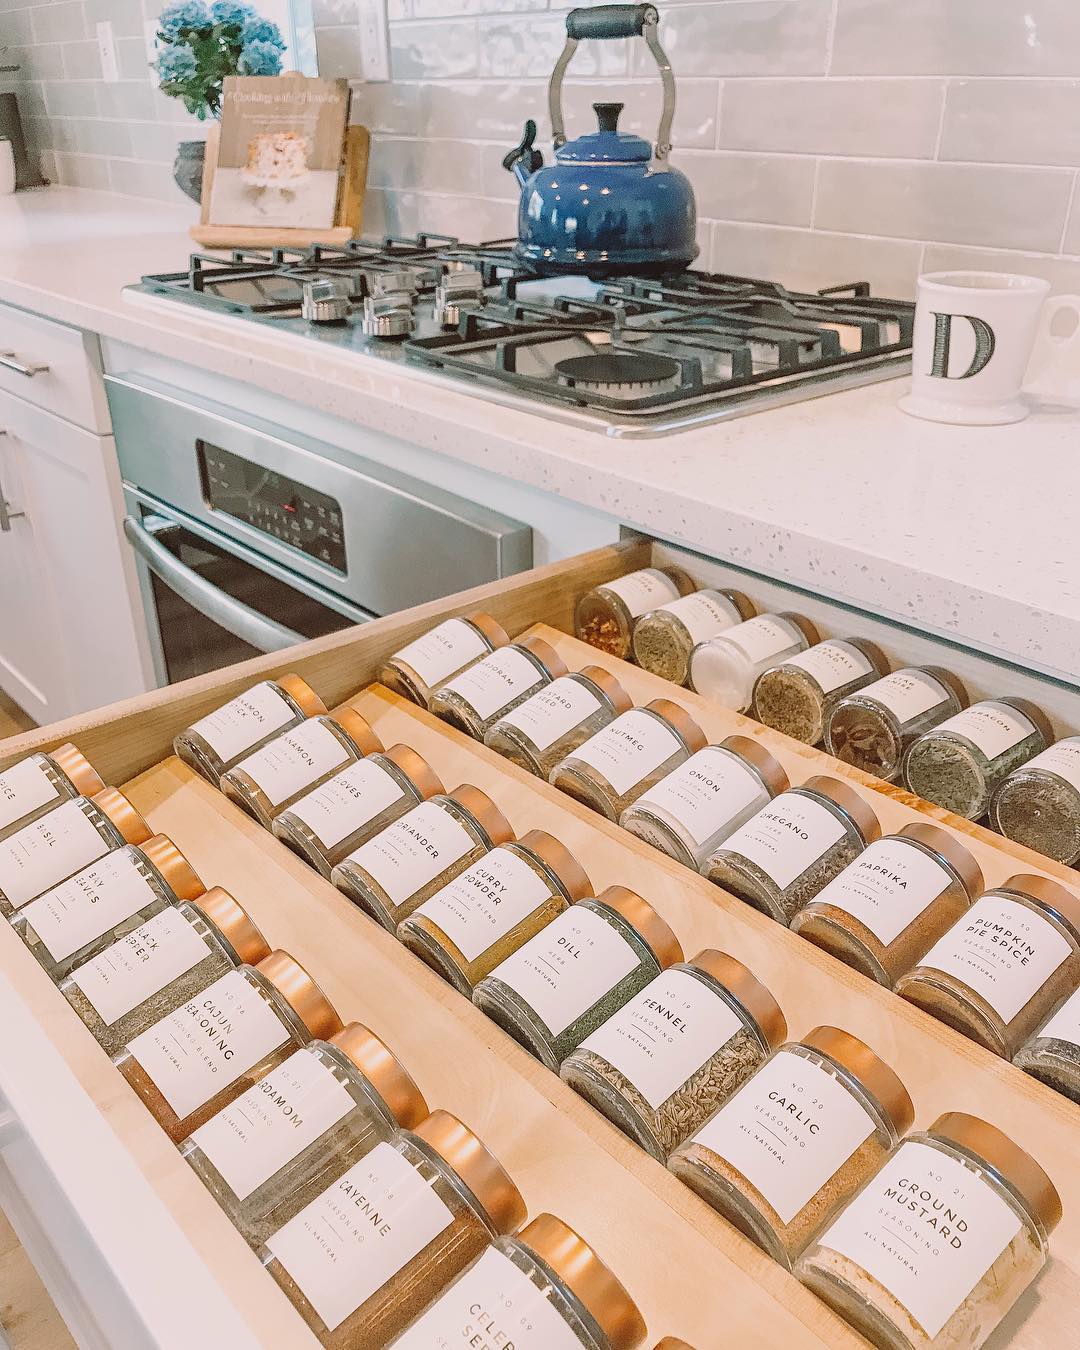 Spice drawer with custom-labeled spices. Photo by Instagram user @thepetalcompany